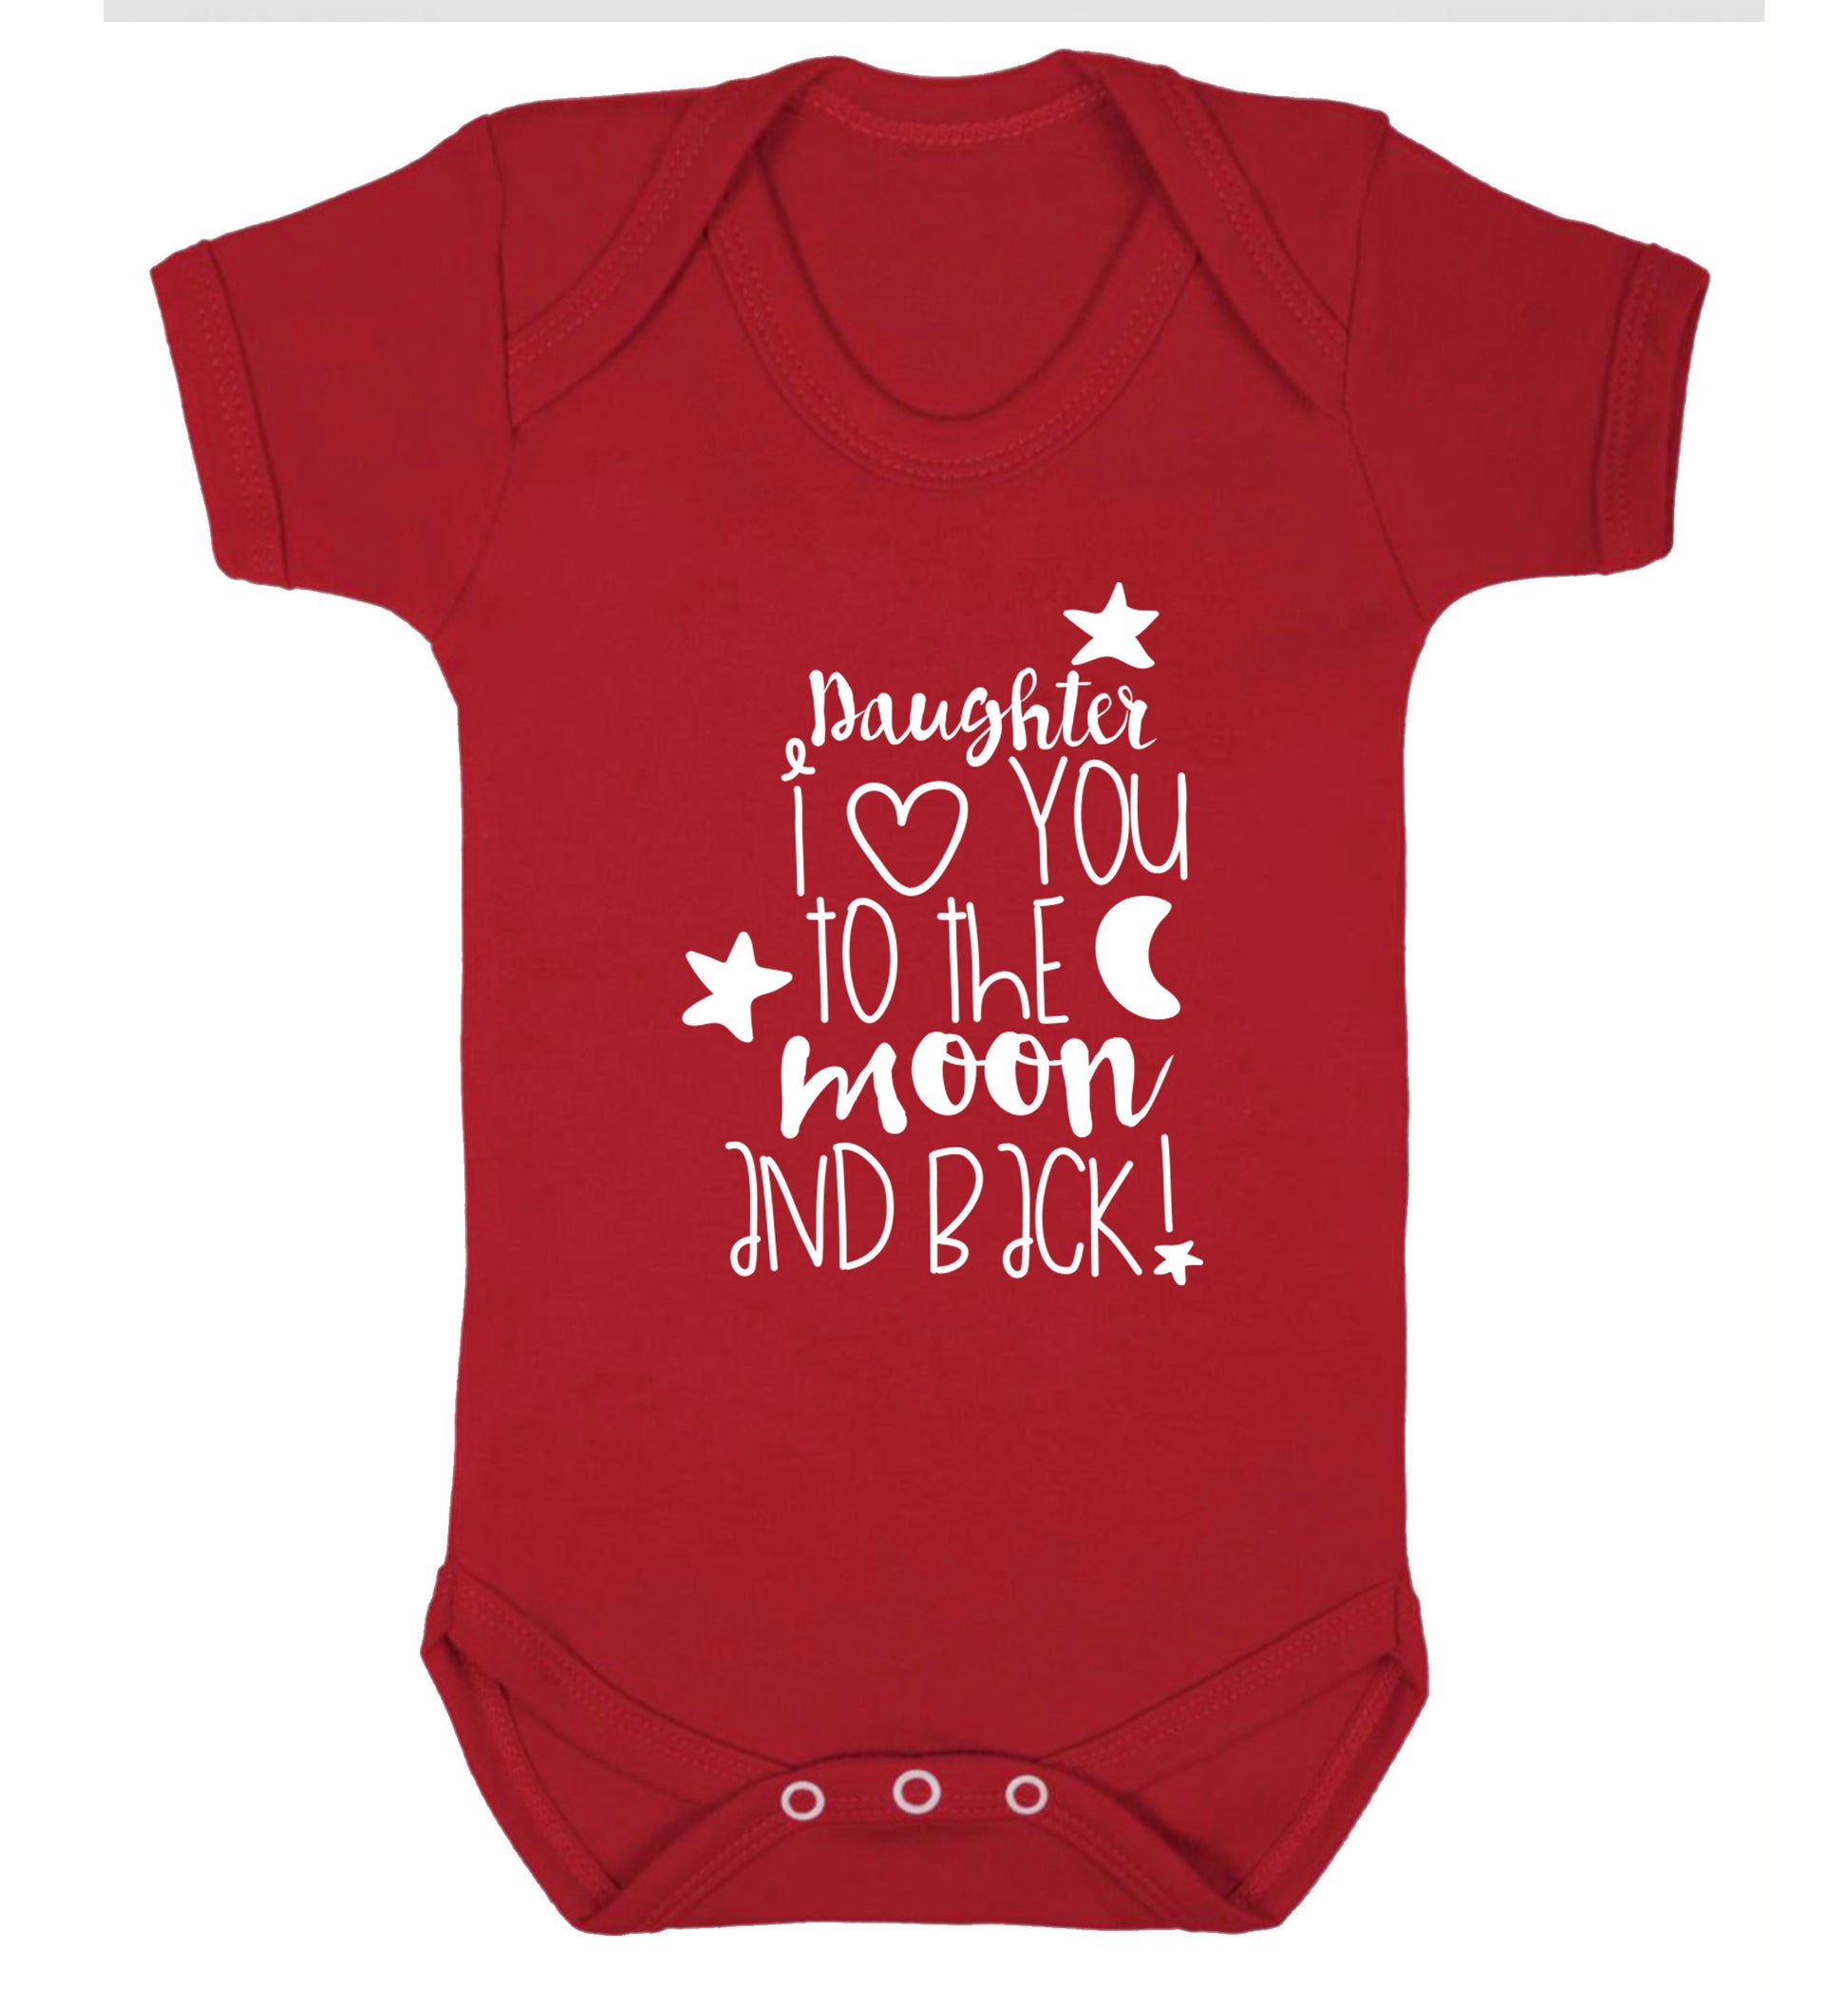 Daughter I love you to the moon and back Baby Vest red 18-24 months